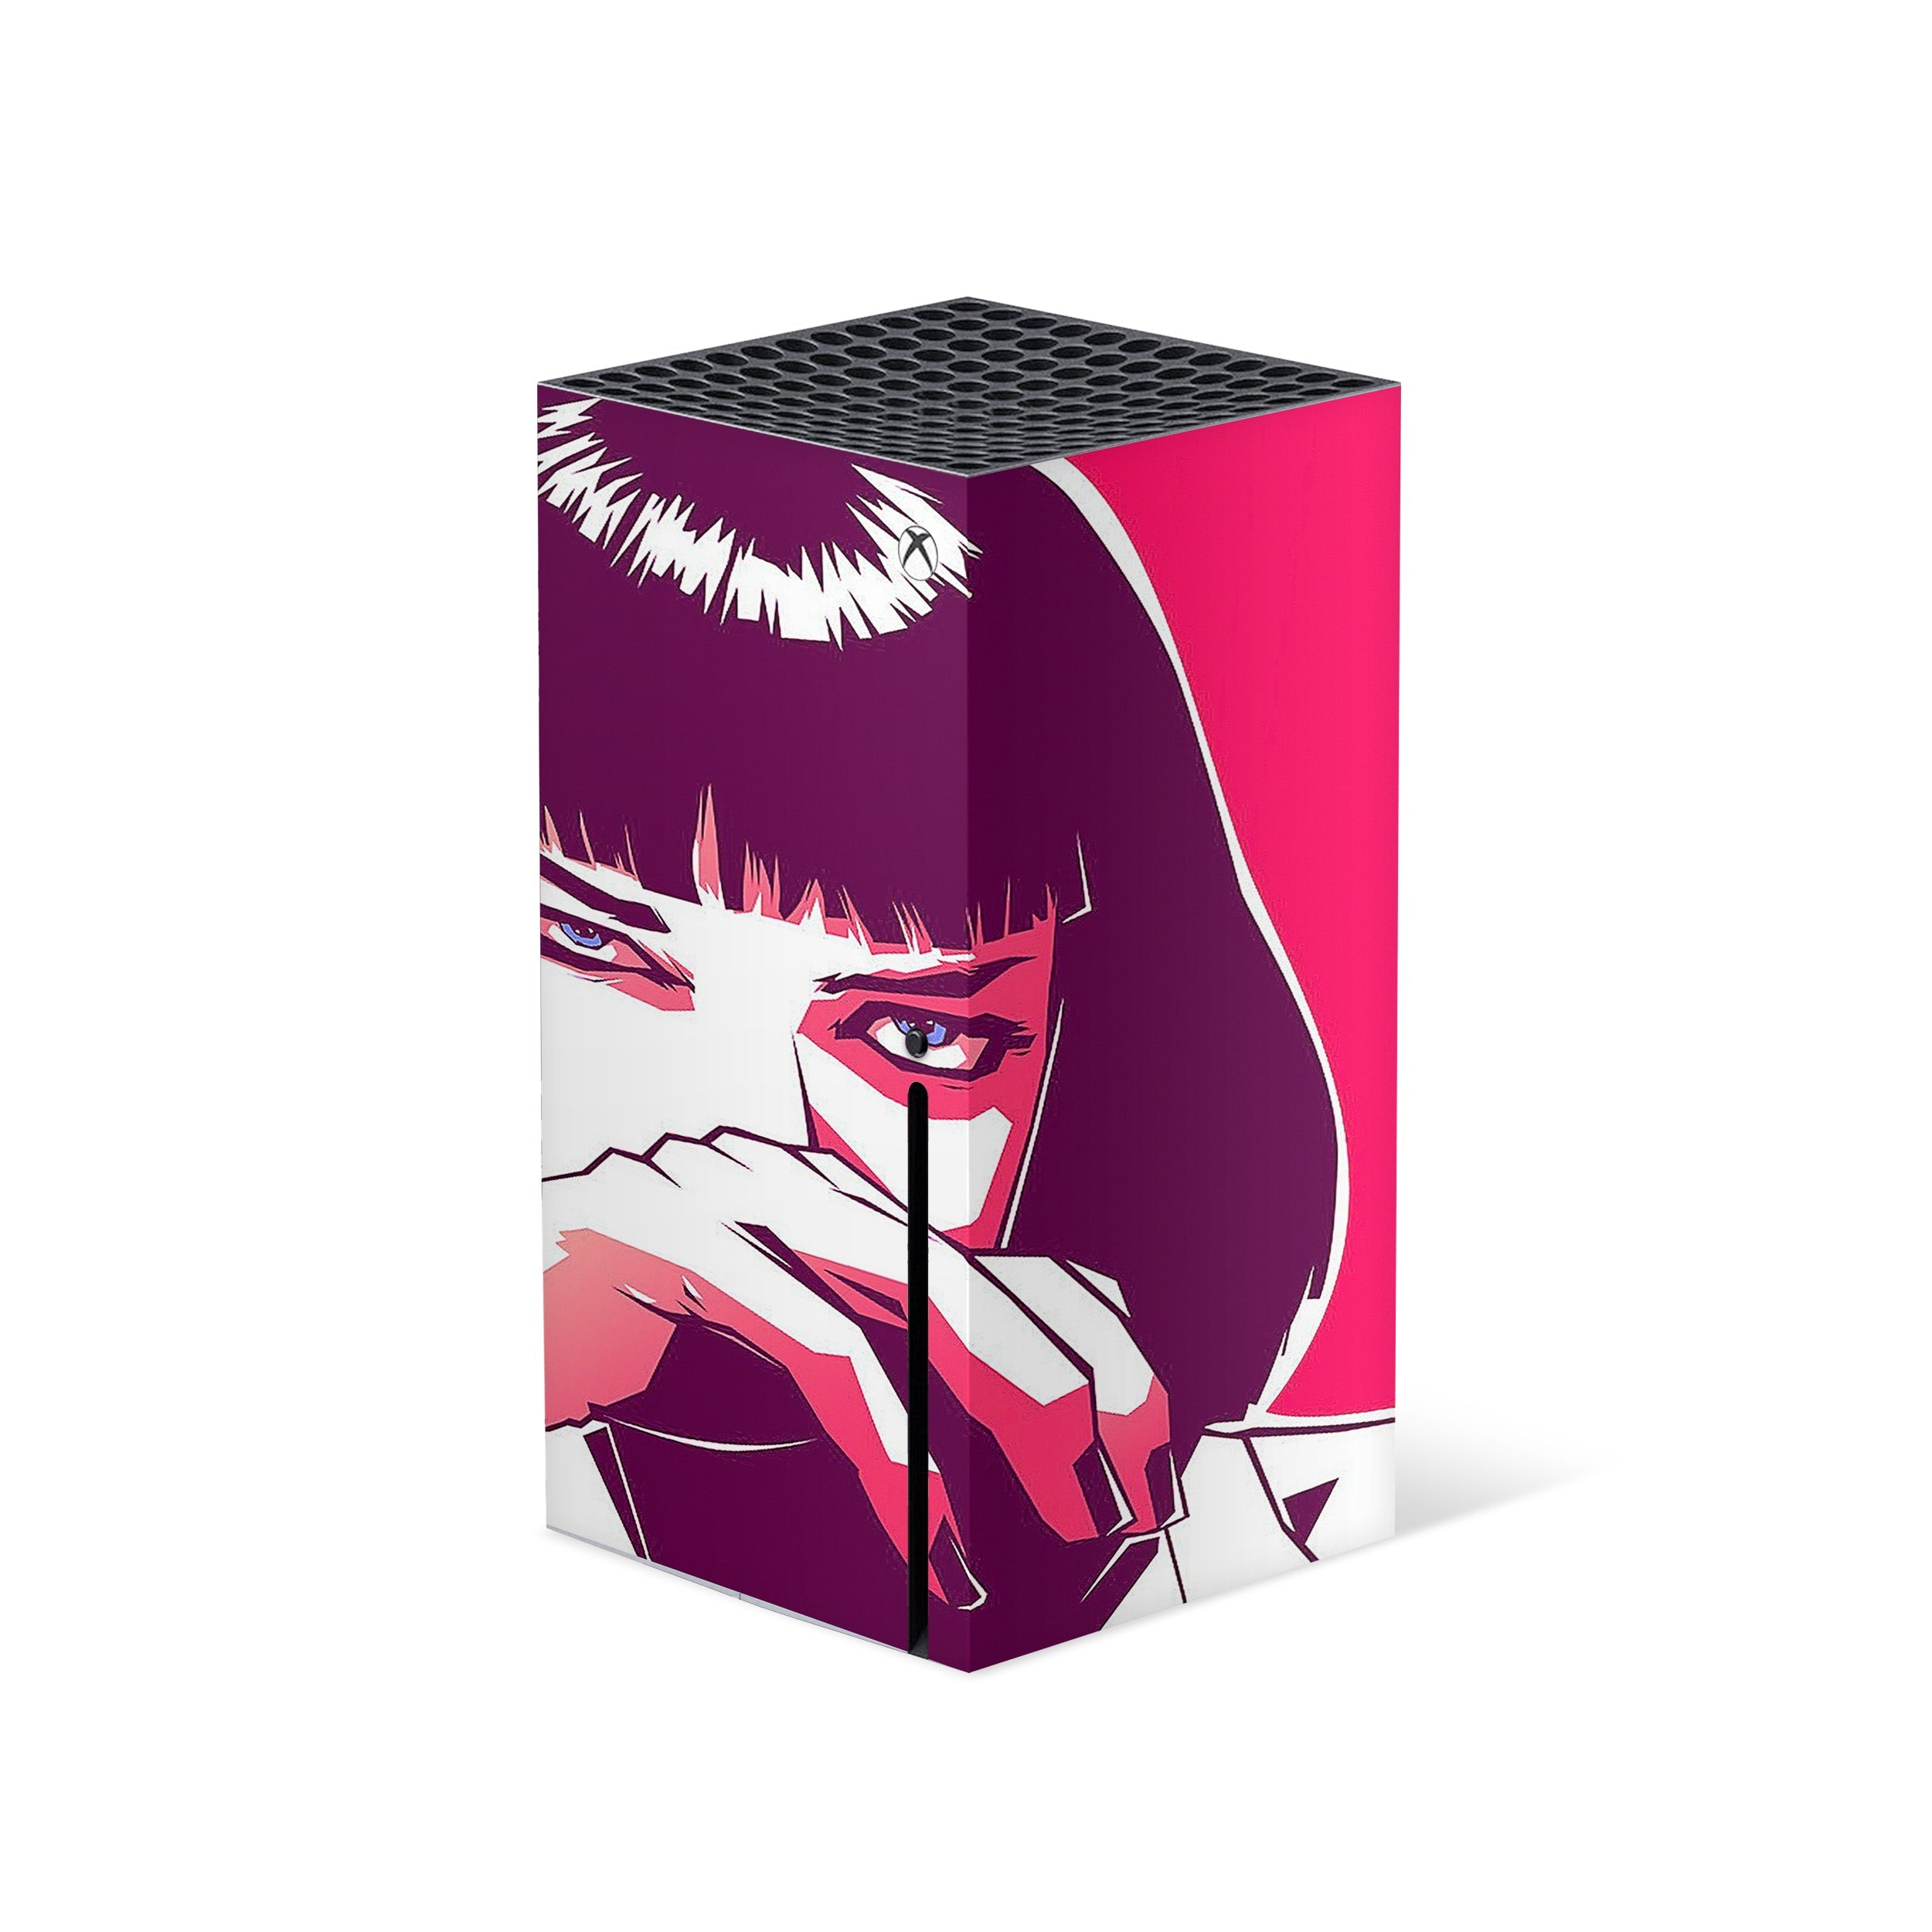 A video game skin featuring a Pulp Fiction Mya Blow design for the Xbox Series X.